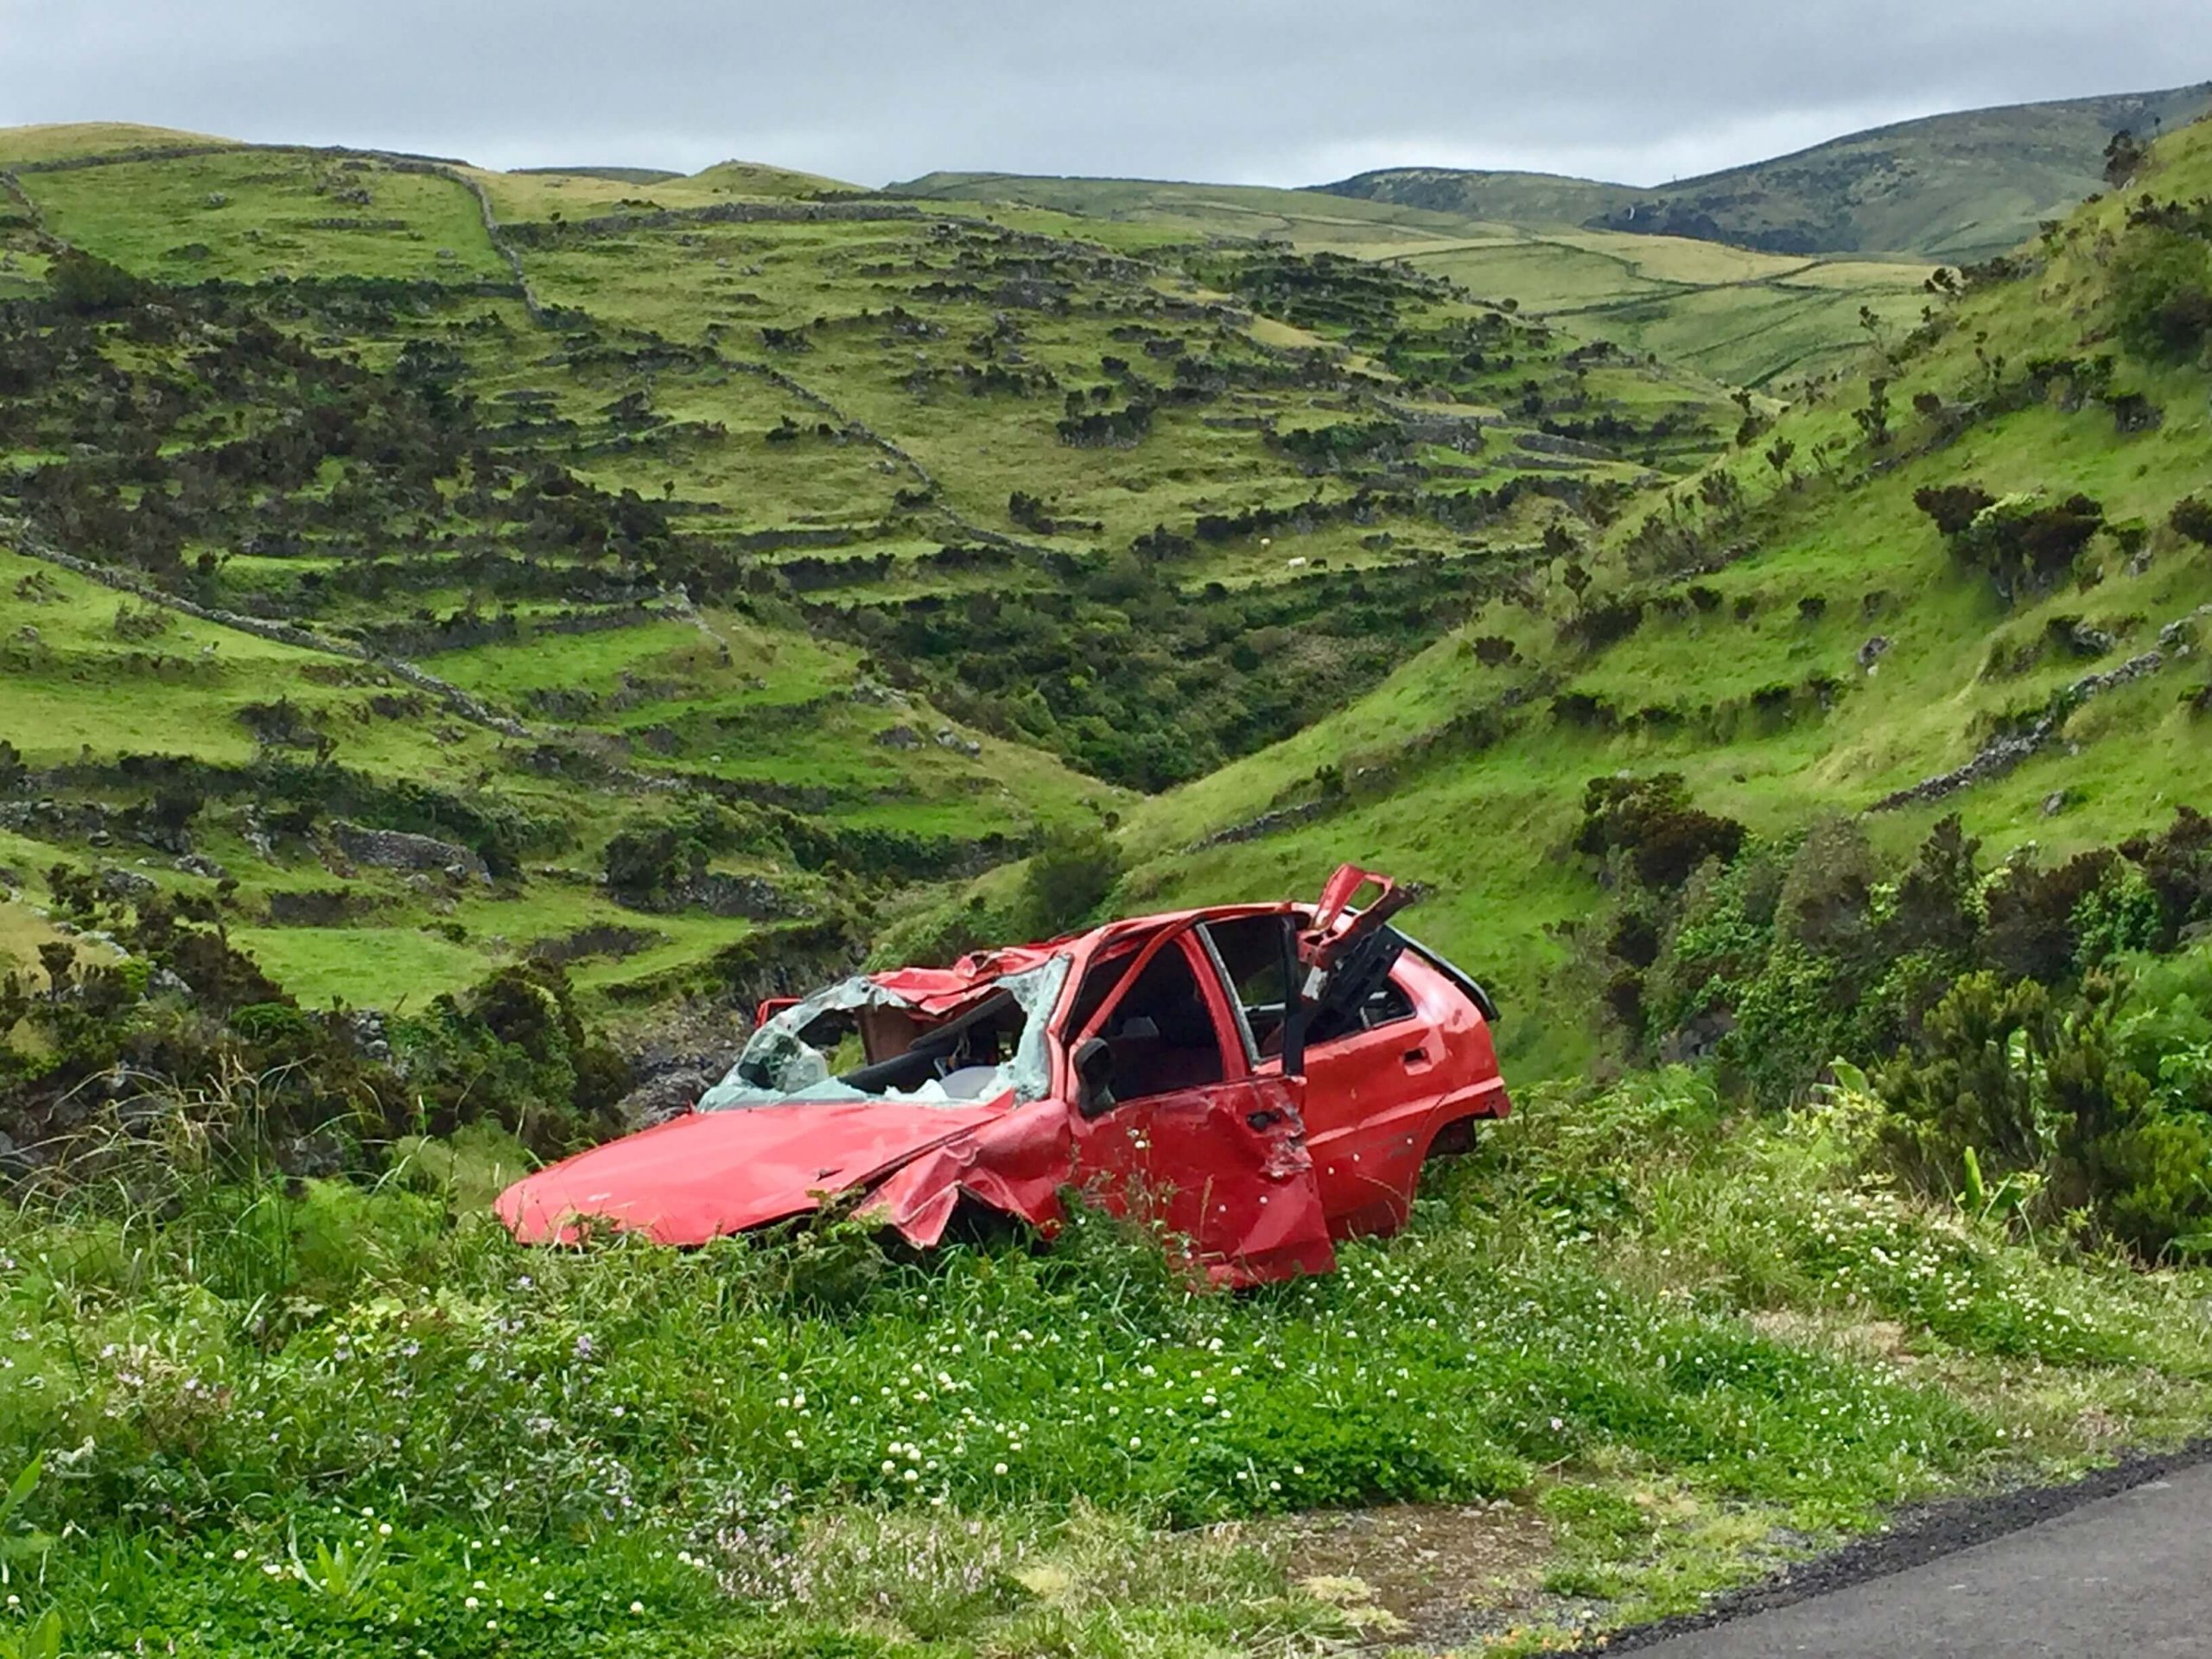 A smashed red car sits in an idyllic field